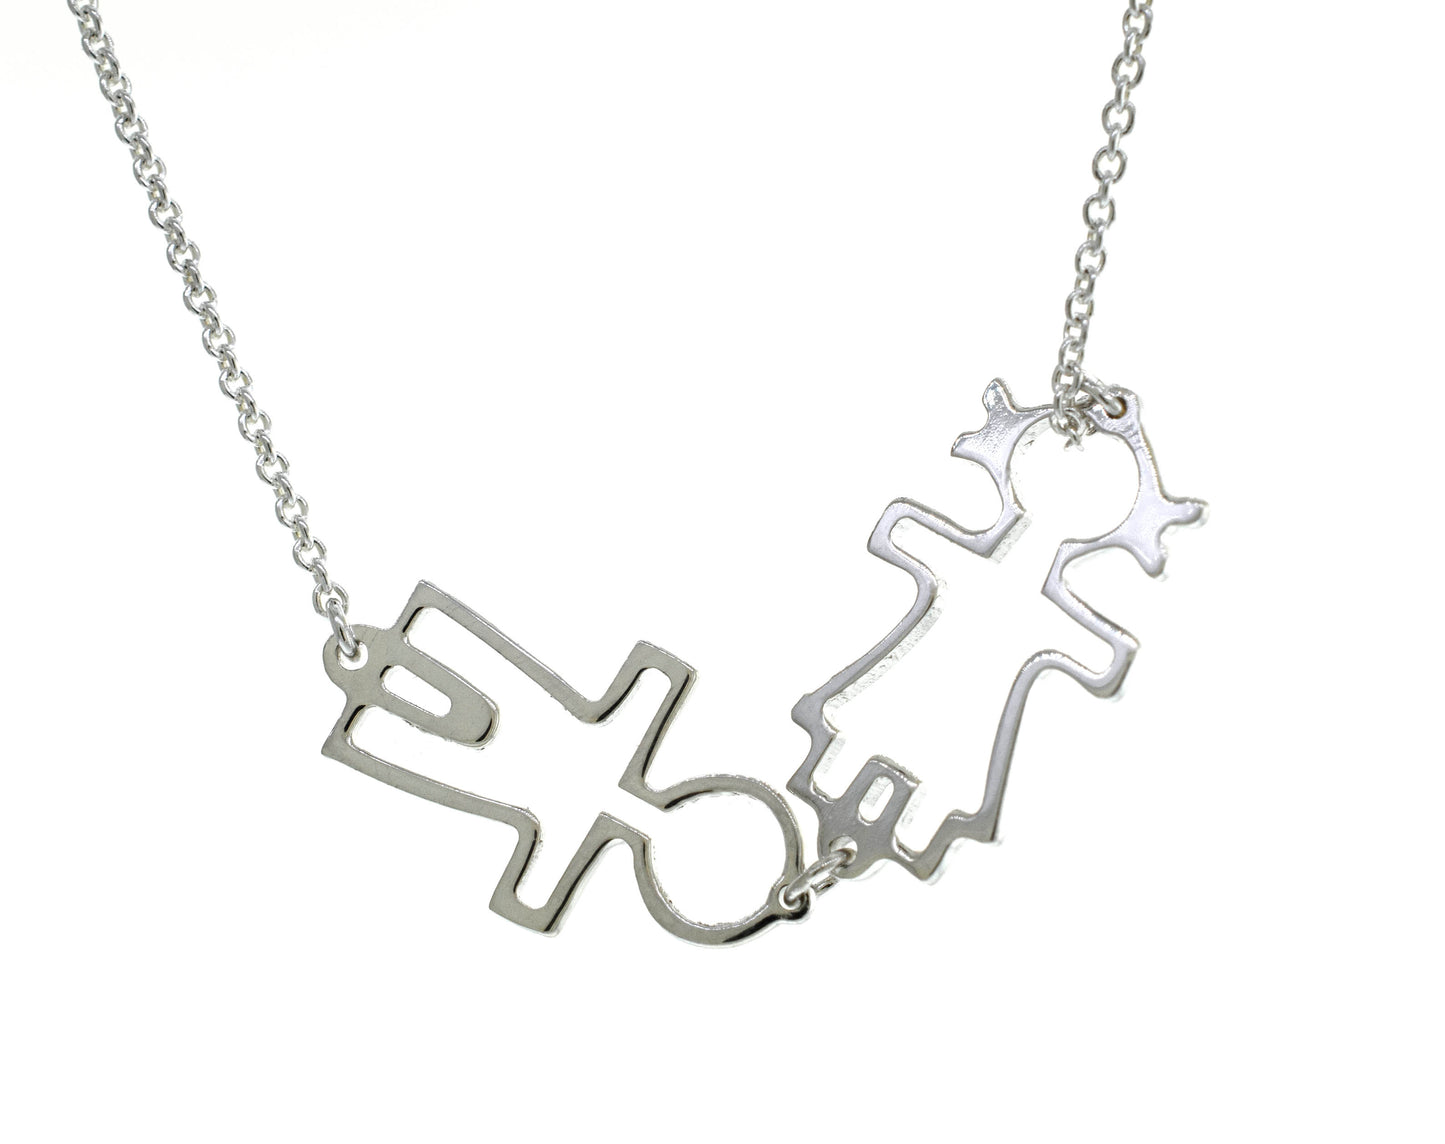 A Super Silver Little Humans Necklace with two figures symbolizing love.